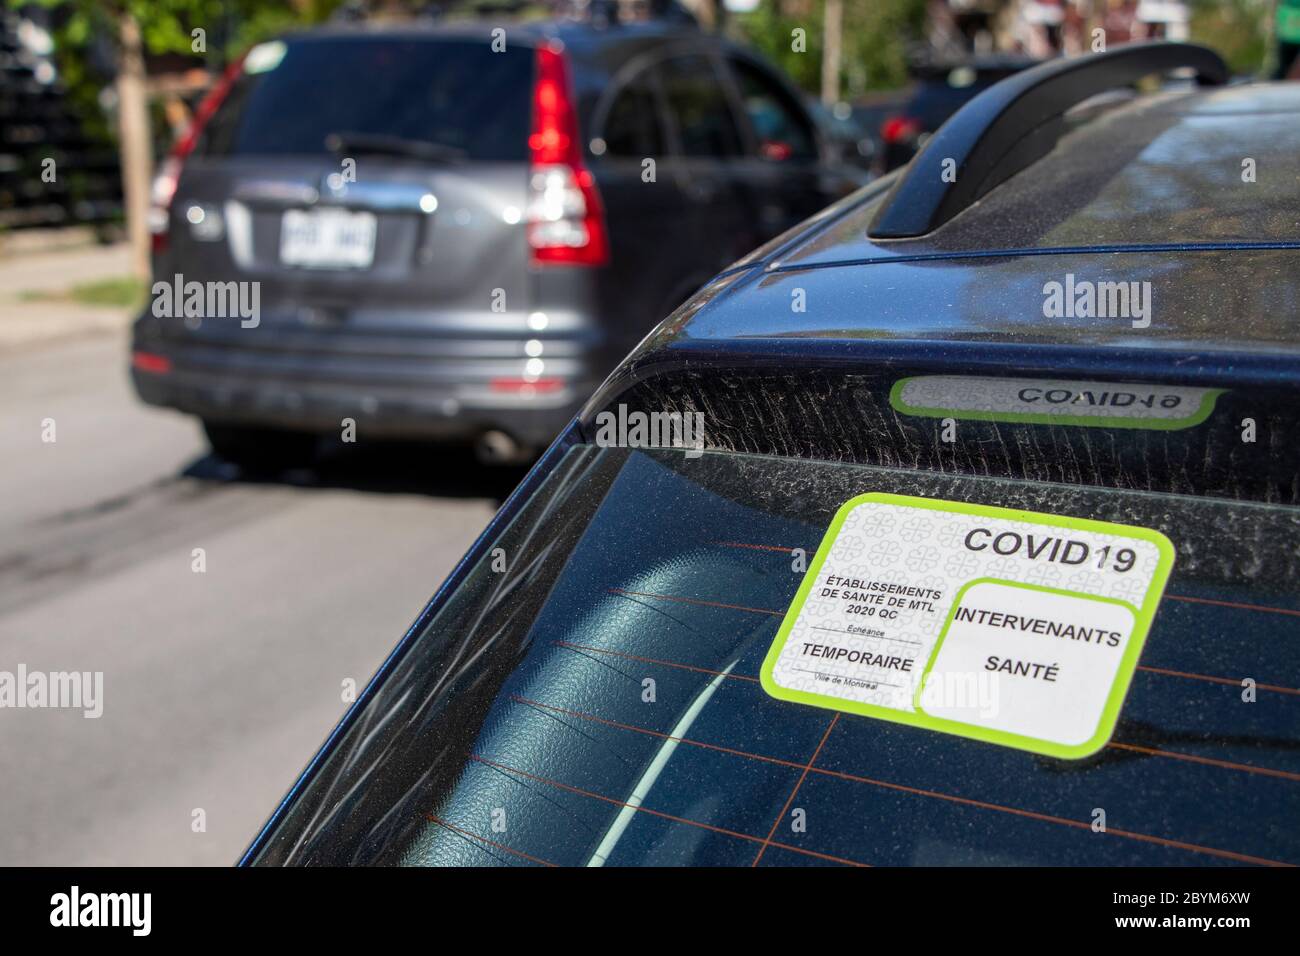 May 22, 2020 - Montreal, Quebec, Canada: COVID-19 Special Parking Permit Sticker for Health worker on a car window, residential street Stock Photo